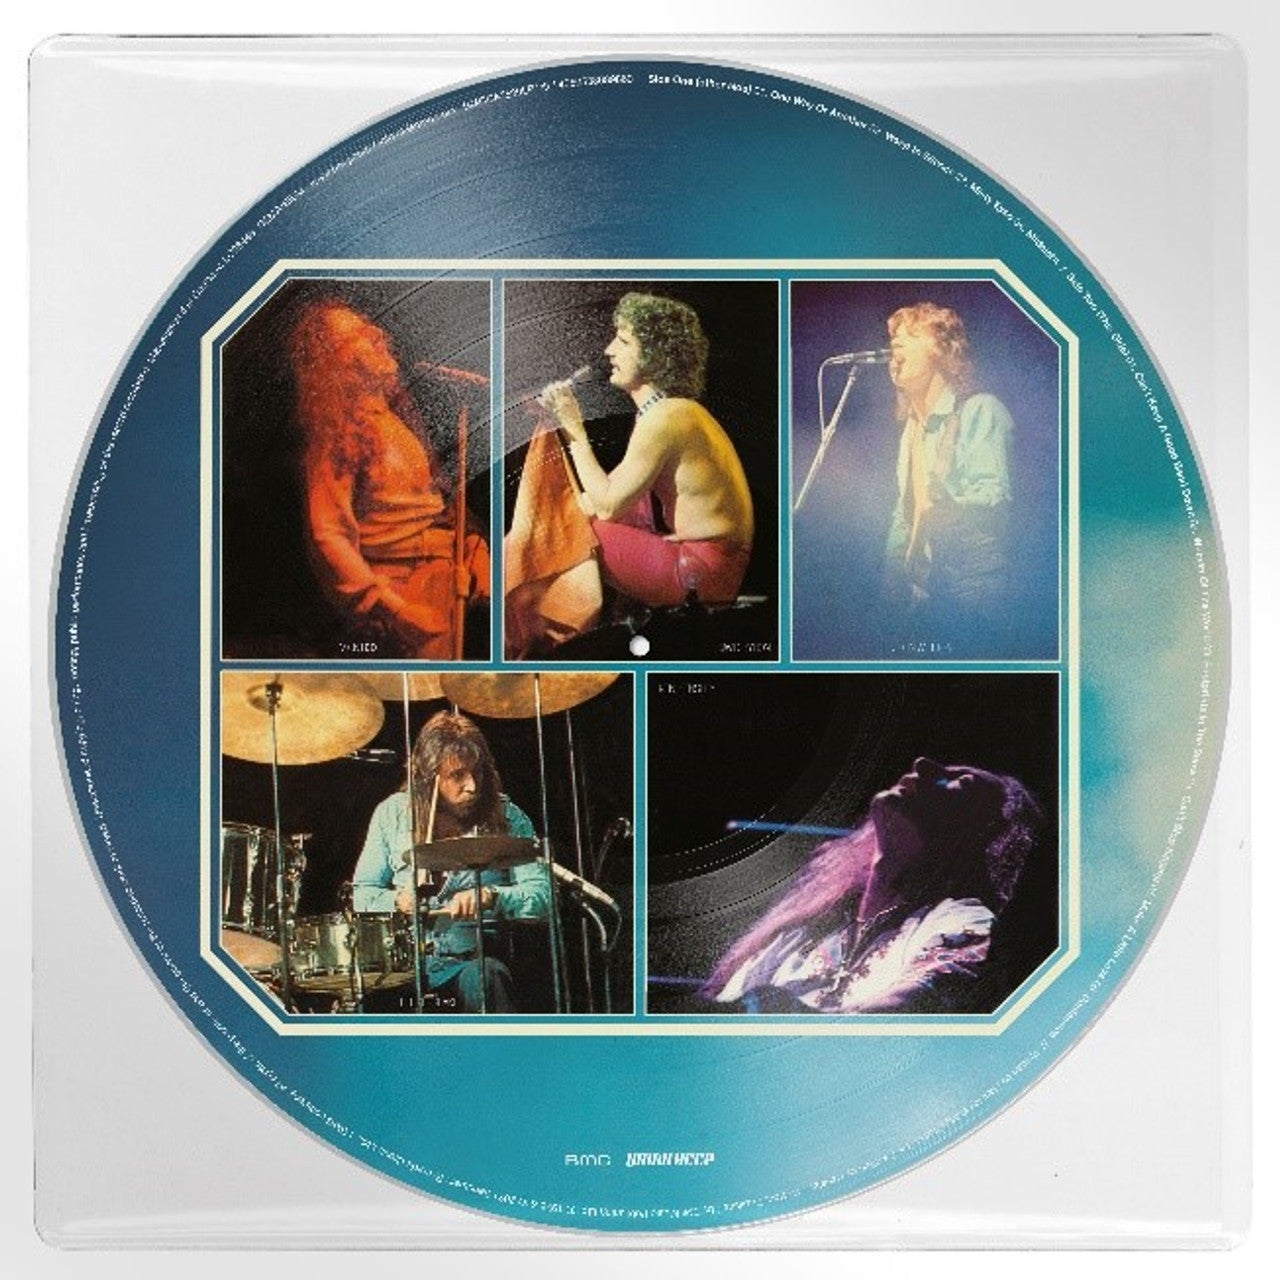 URIAH HEEP 'HIGH AND MIGHTY' LP (Picture Disc)